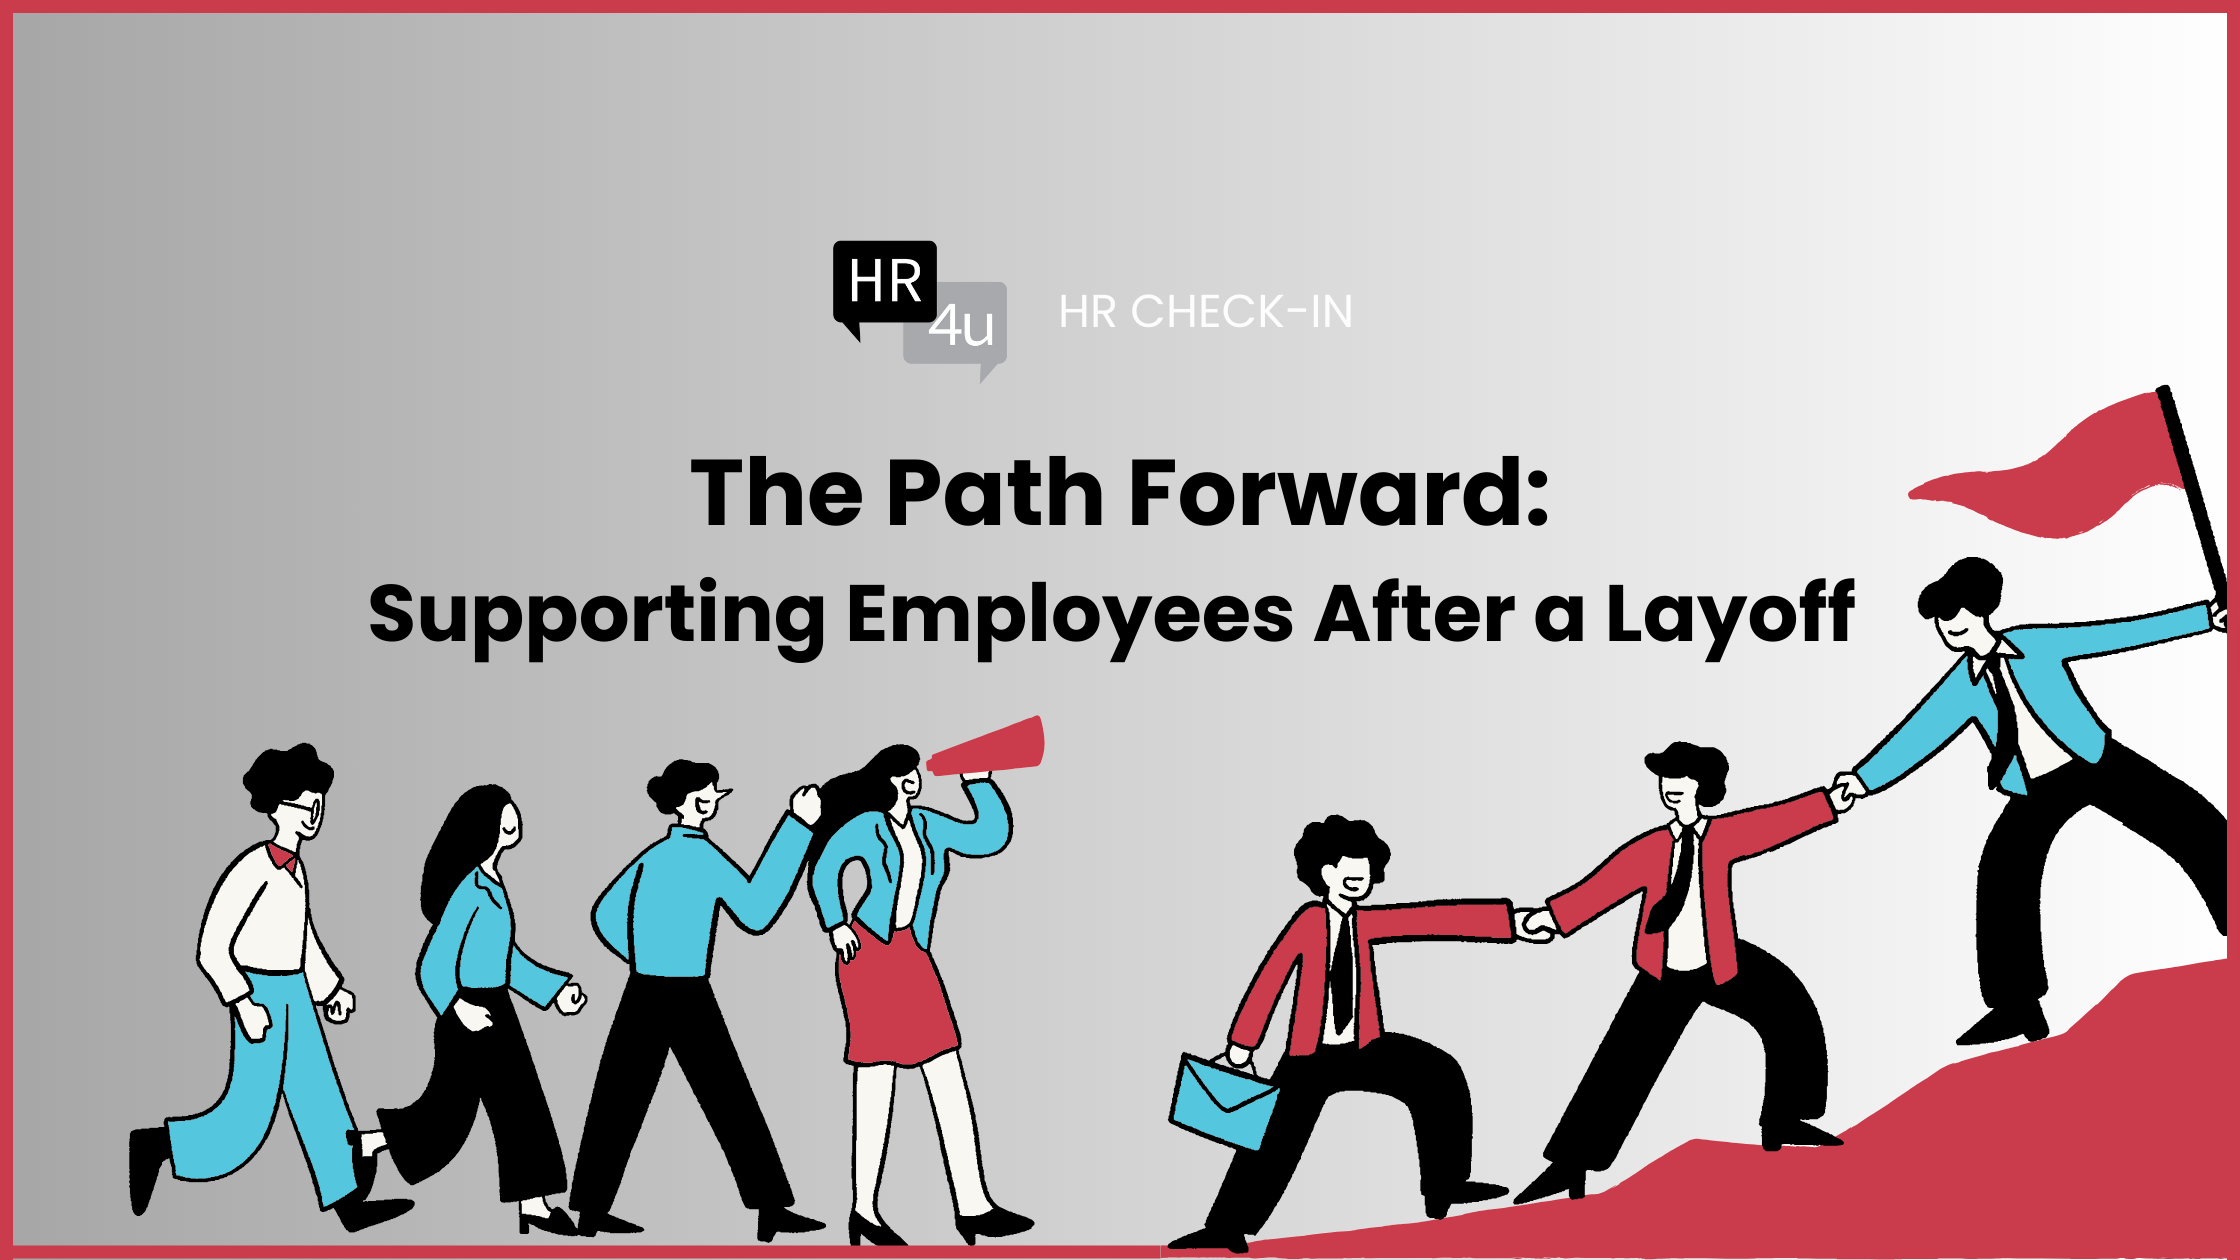 The Path Forward: Supporting Employees After a Layoff